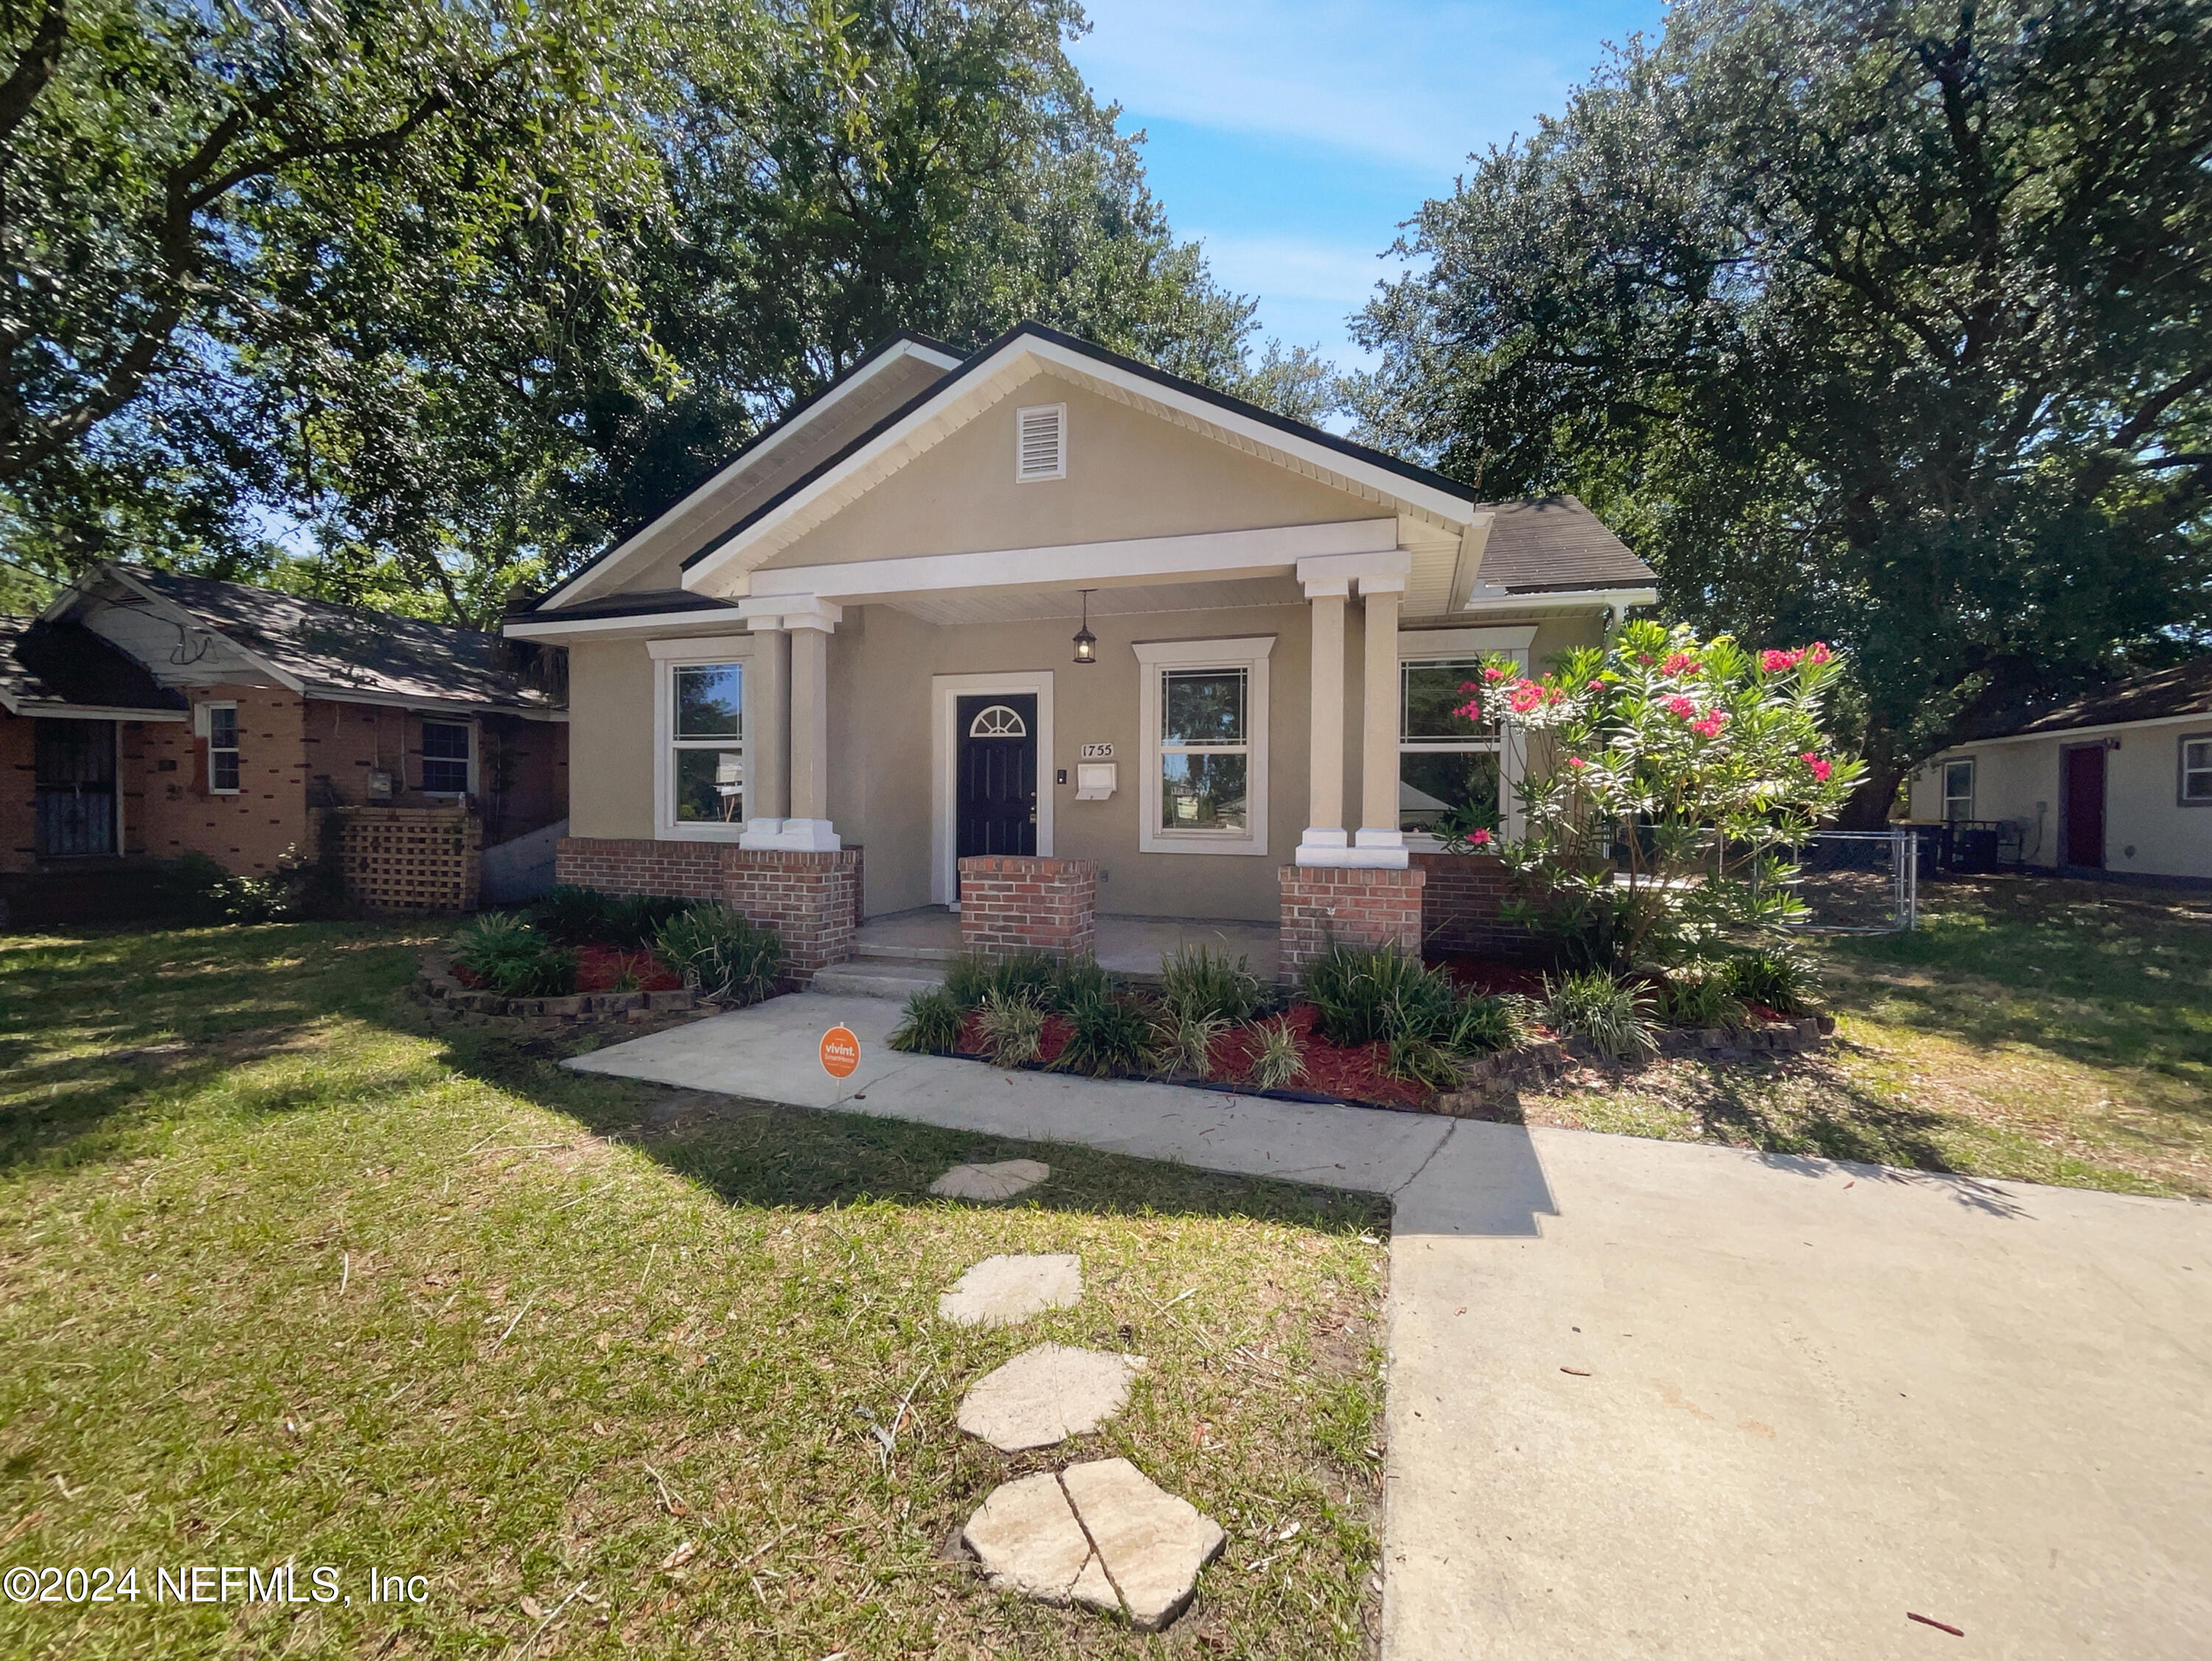 Jacksonville, FL home for sale located at 1755 McMillan Street, Jacksonville, FL 32209